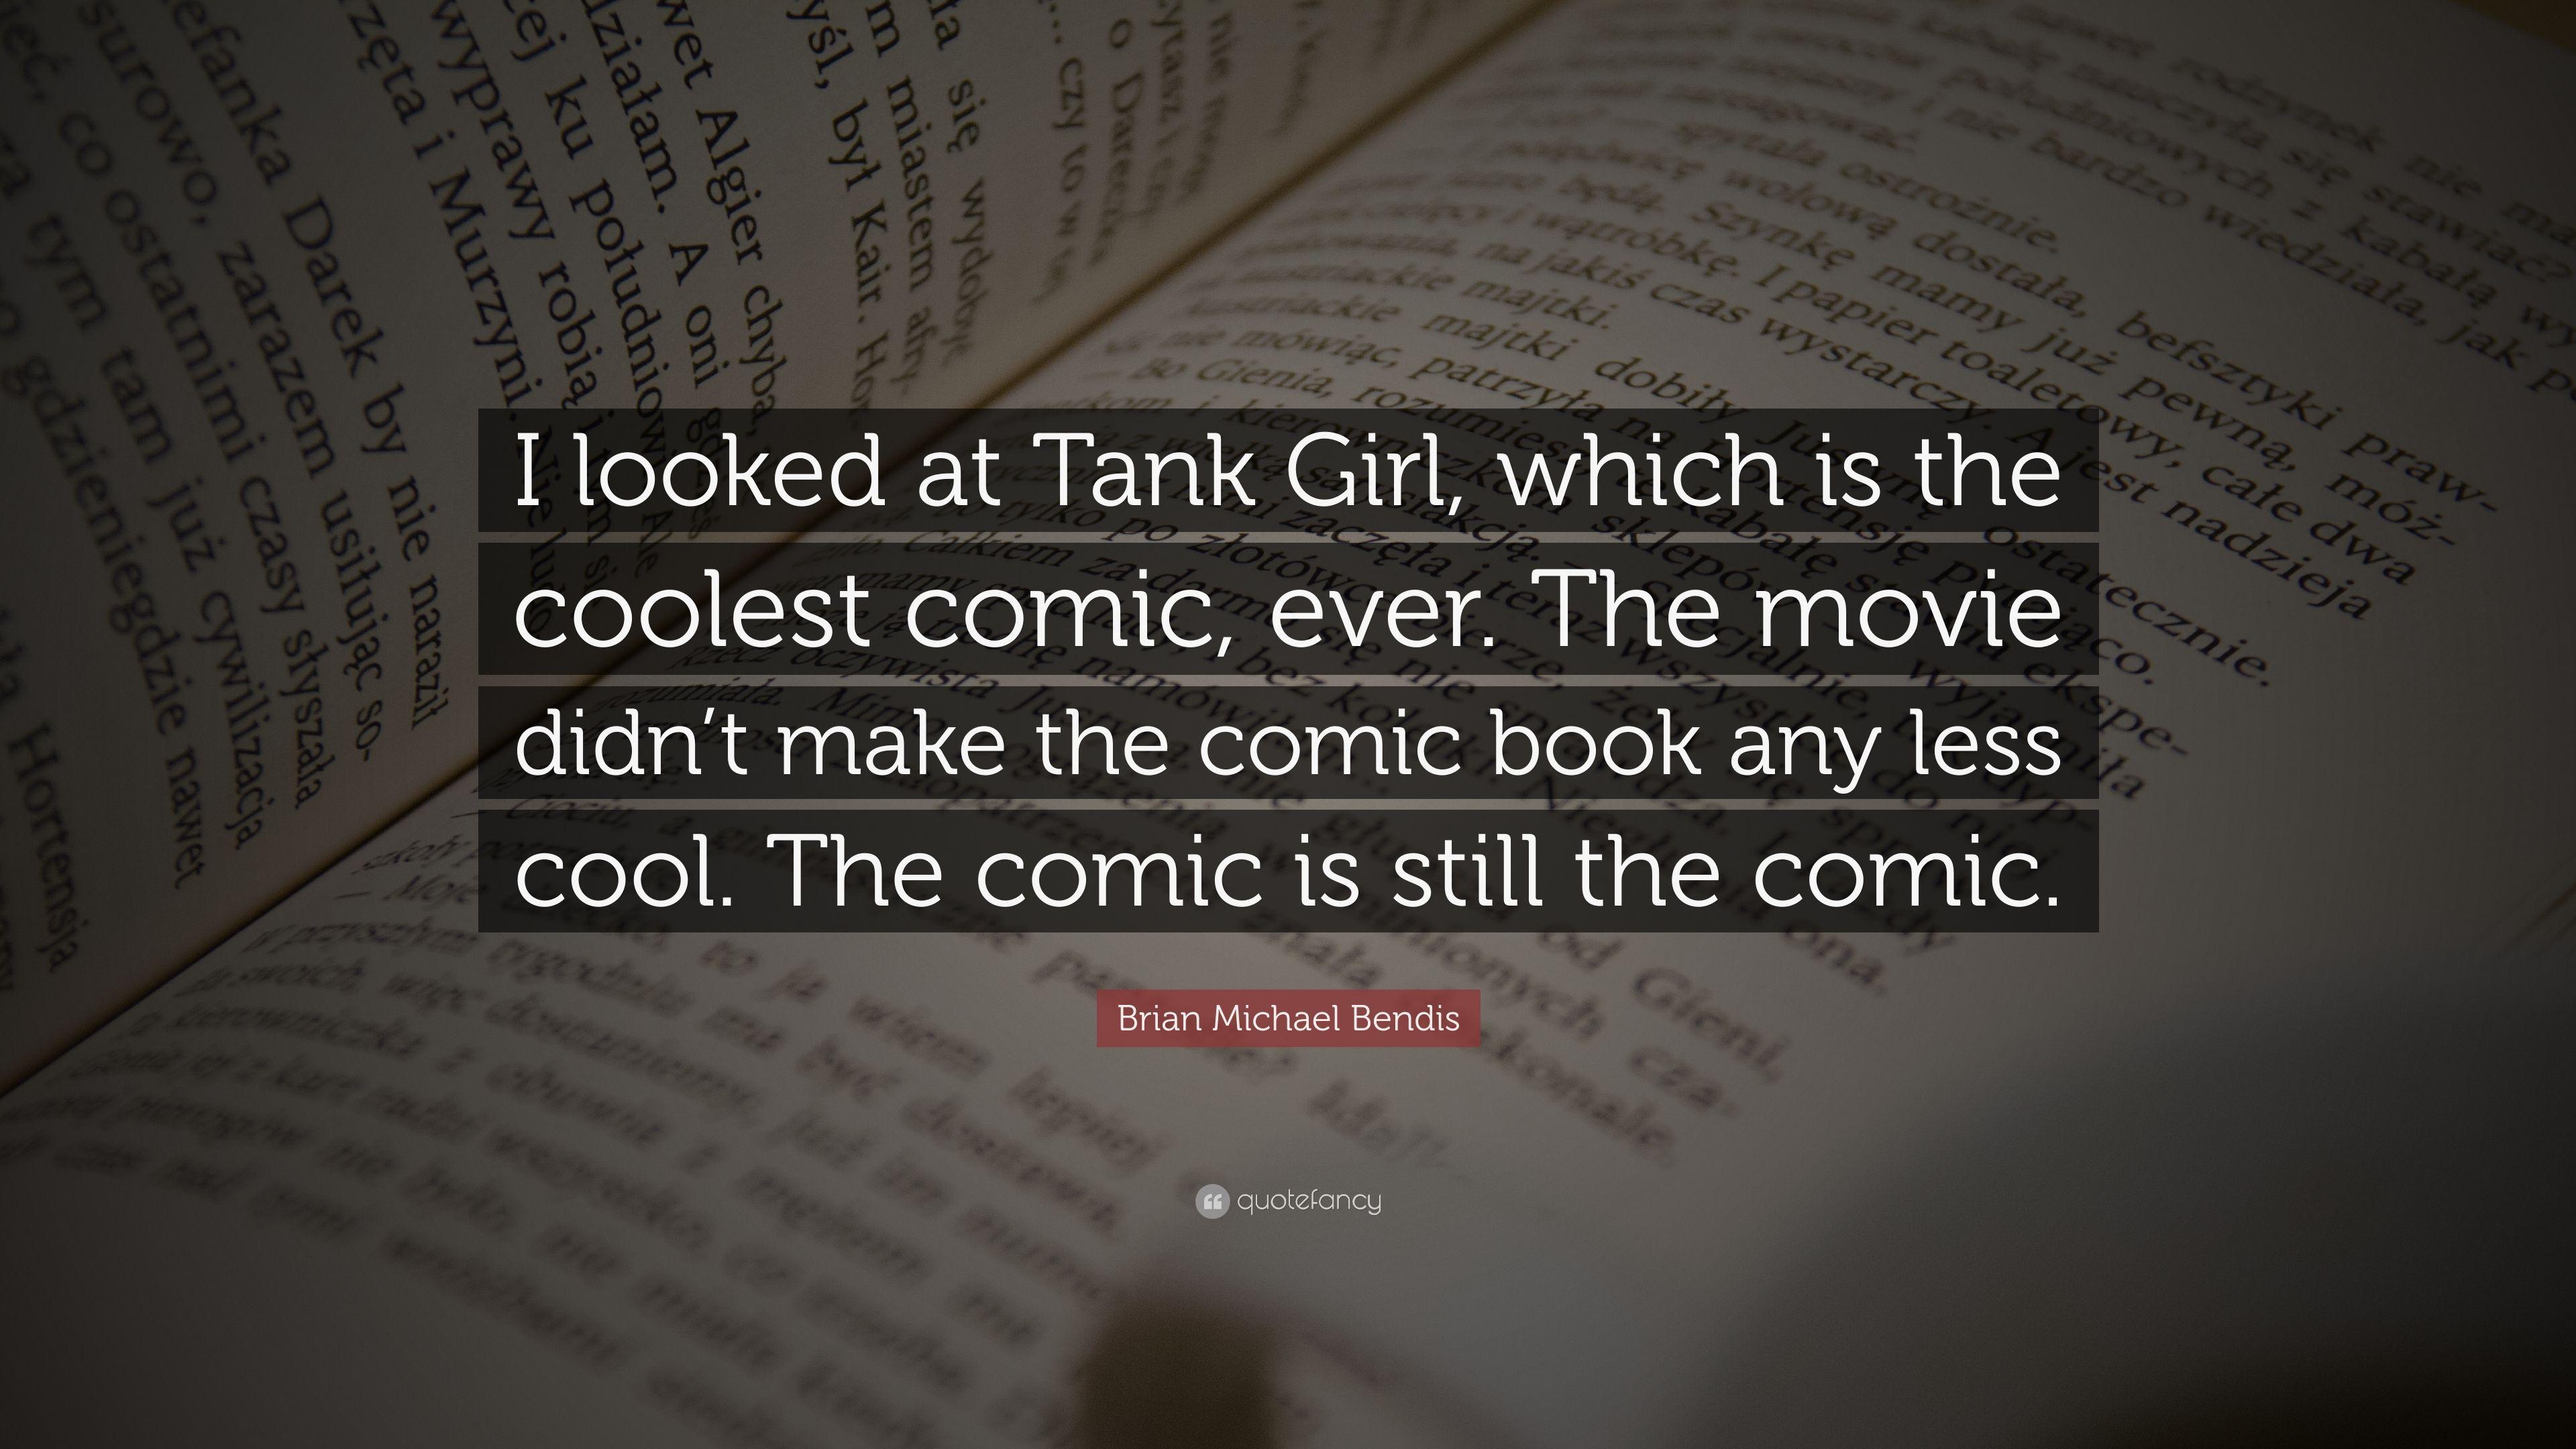 Brian Michael Bendis Quote: “I looked at Tank Girl, which is